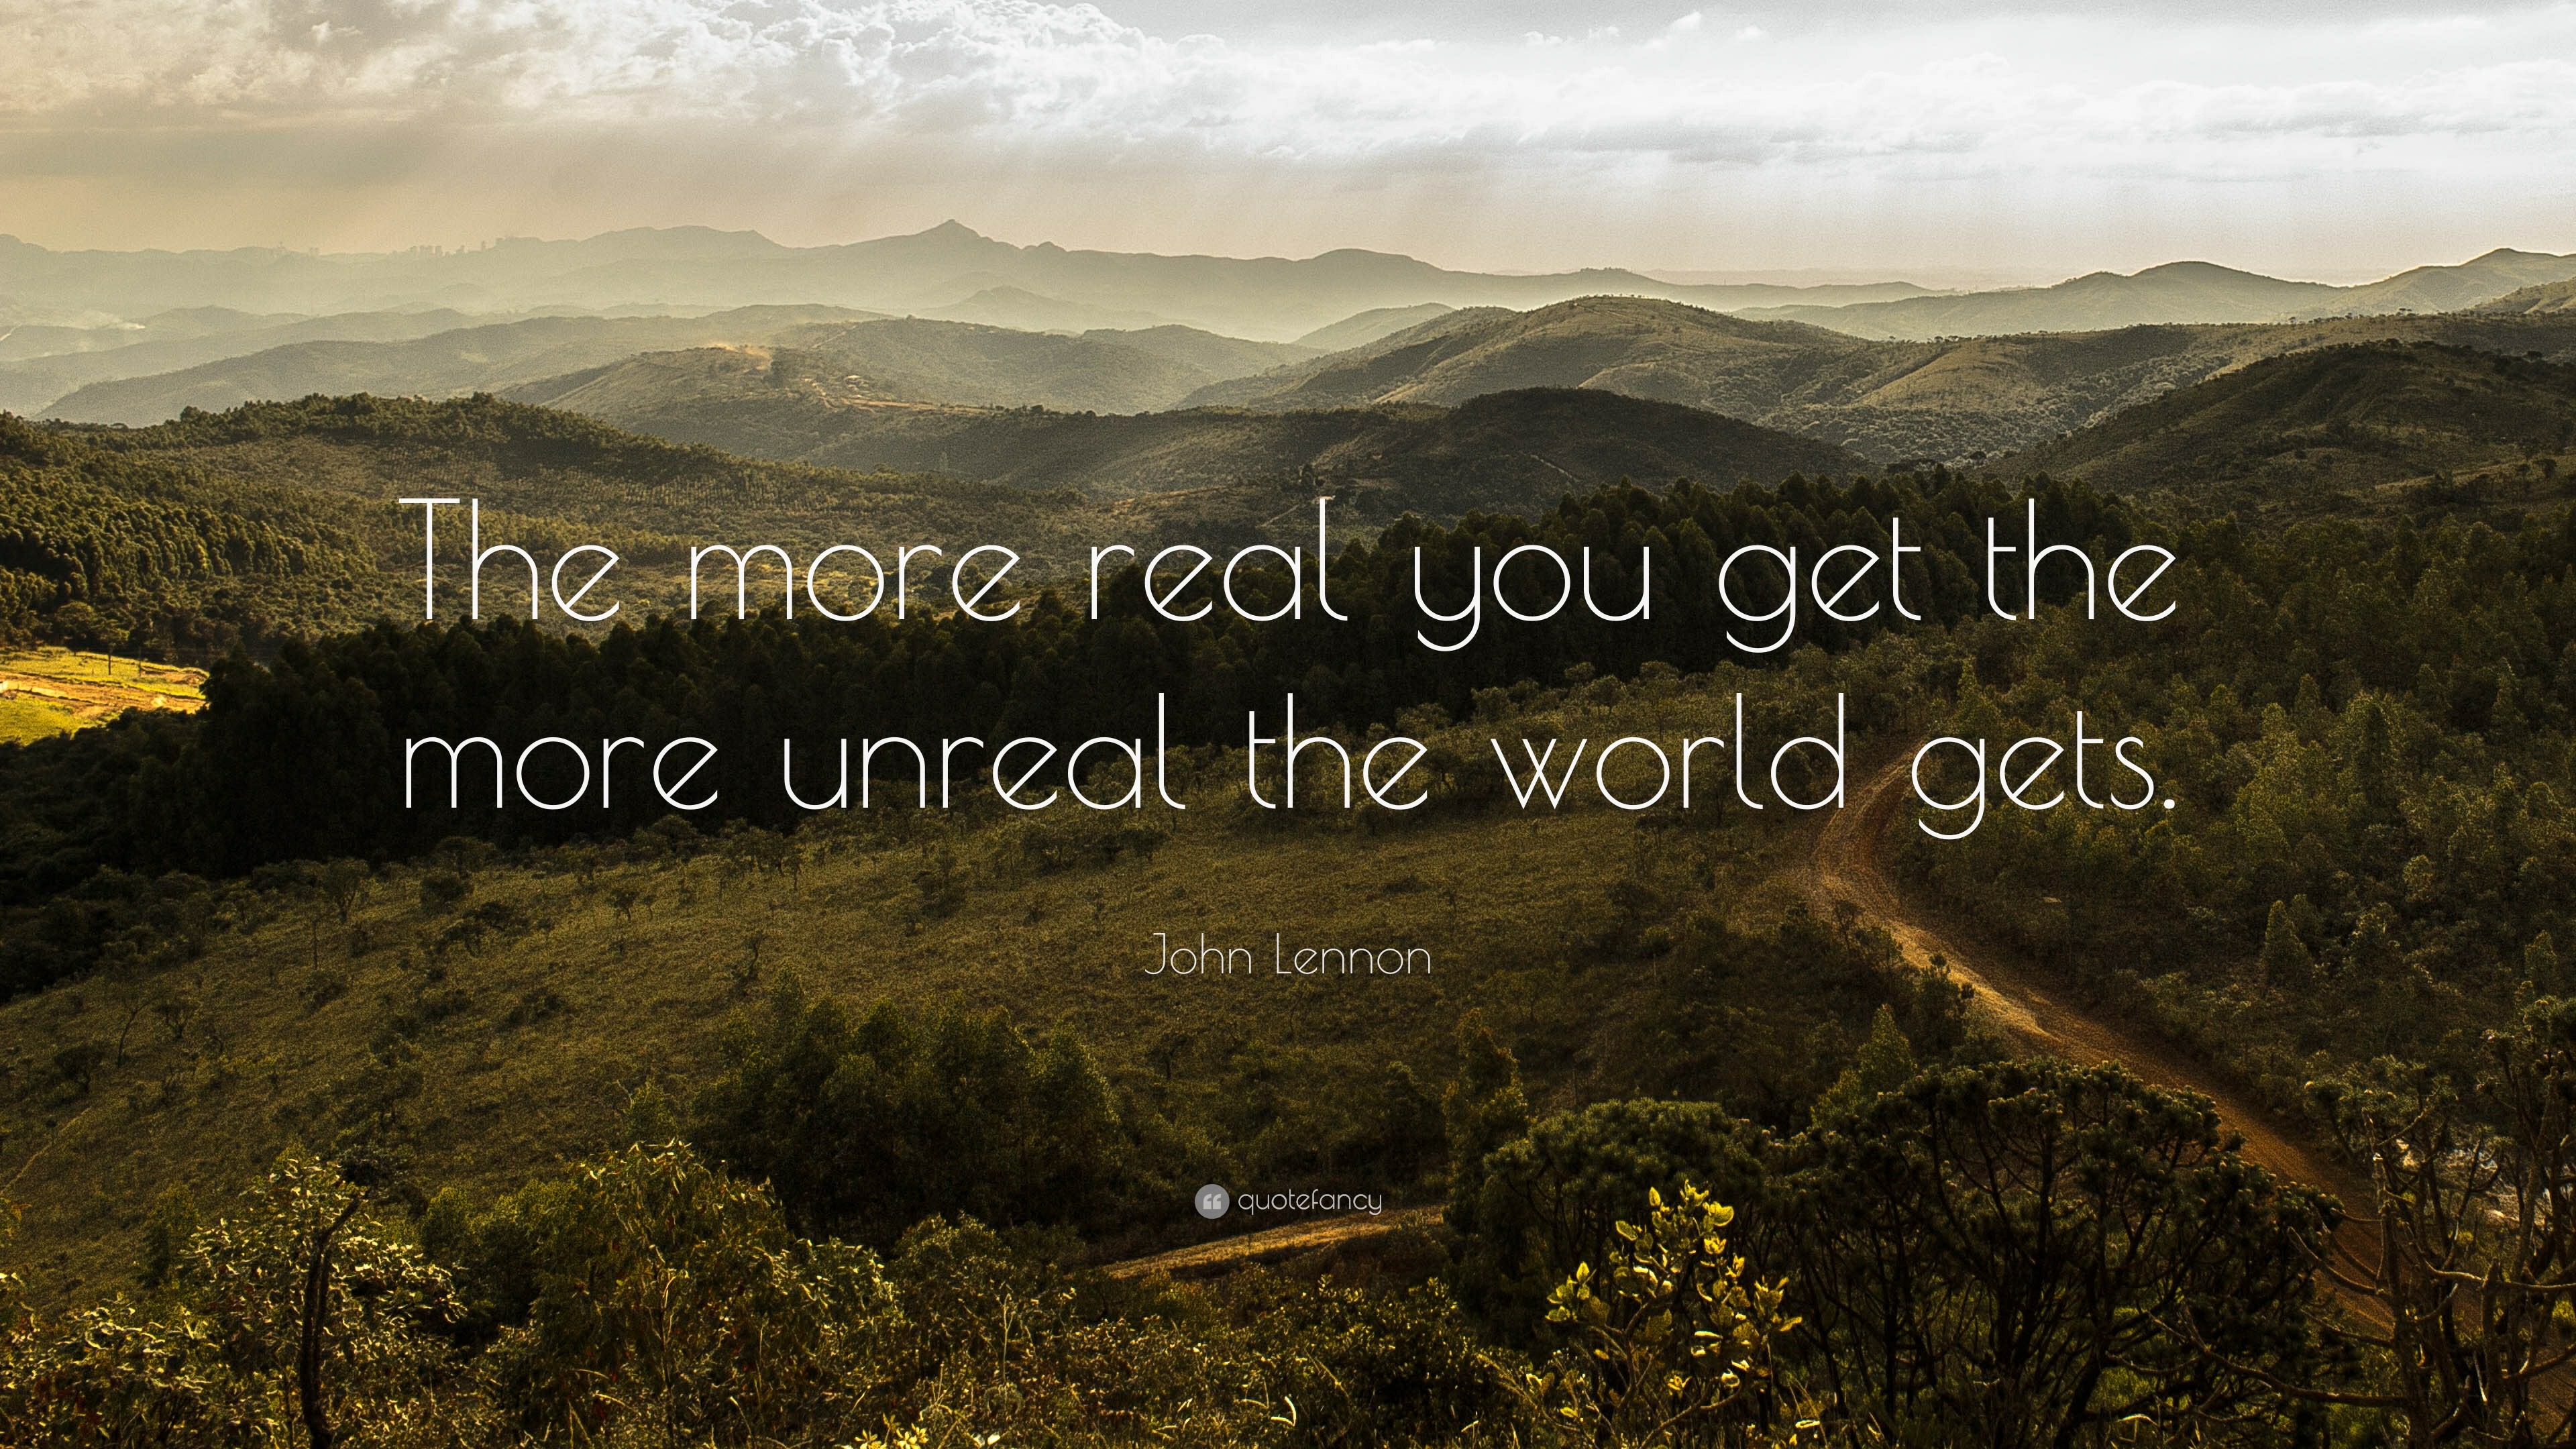 3840x2160 John Lennon Quote: “The more real you get the more unreal the world gets